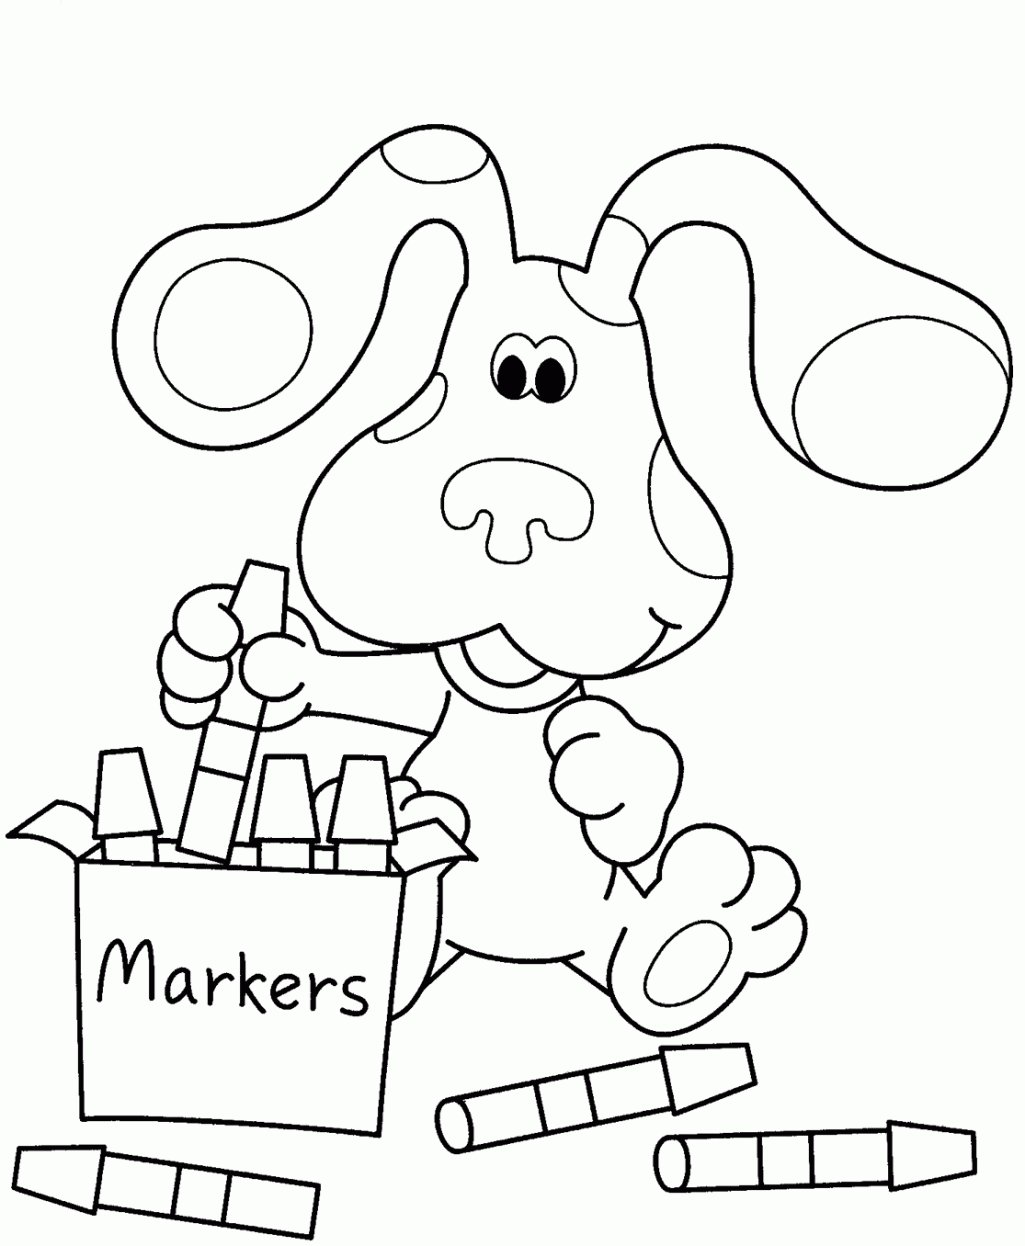 Coloring Pages Disney Jr   Coloring Home